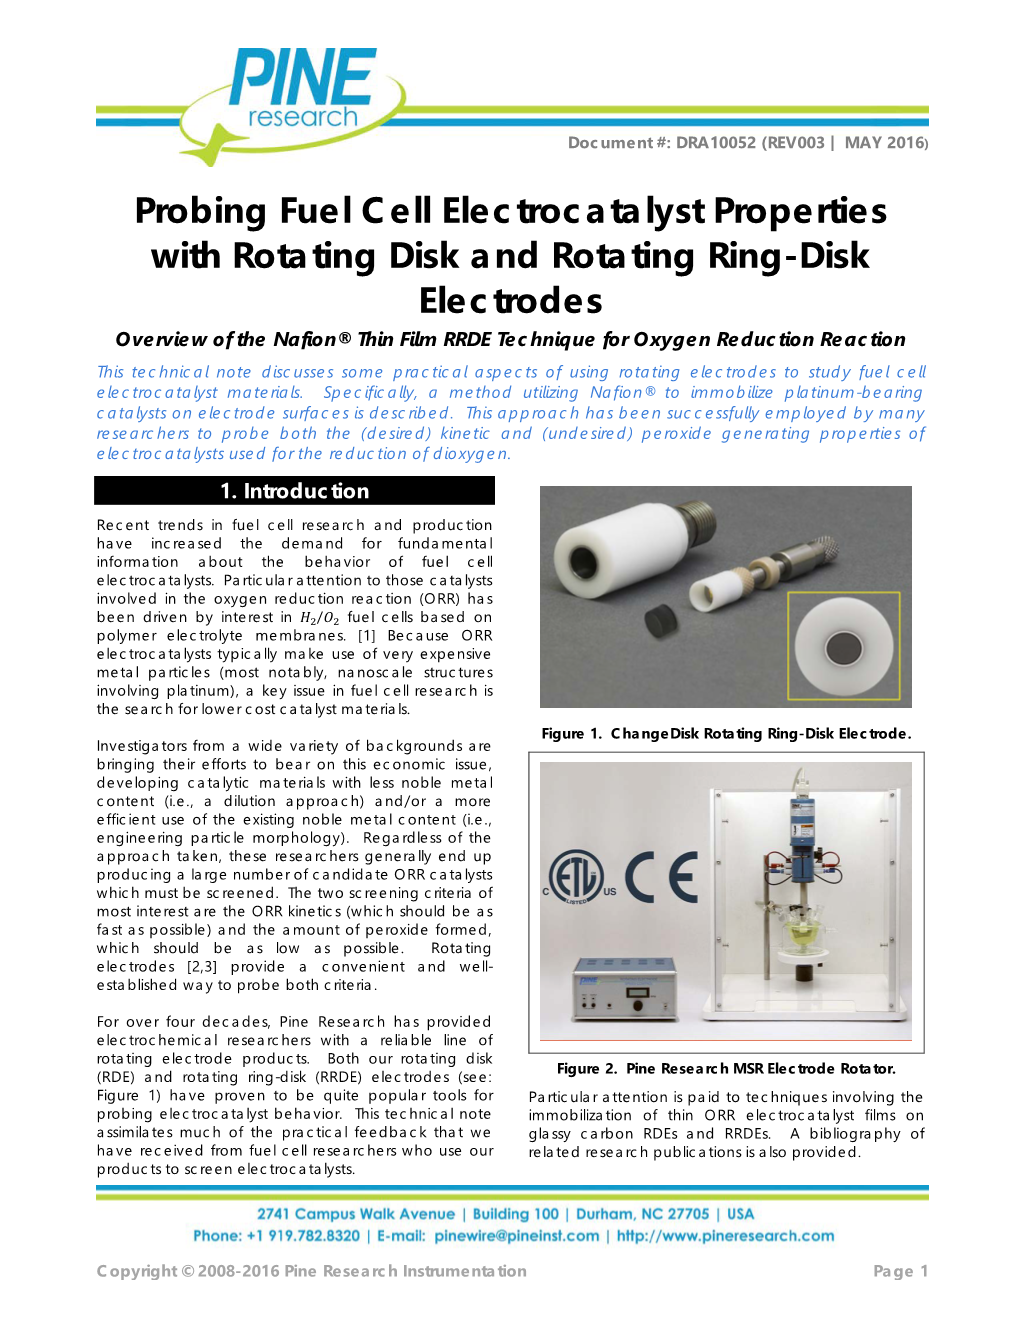 Probing Fuel Cell Electrocatalyst Properties with Rotating Disk And